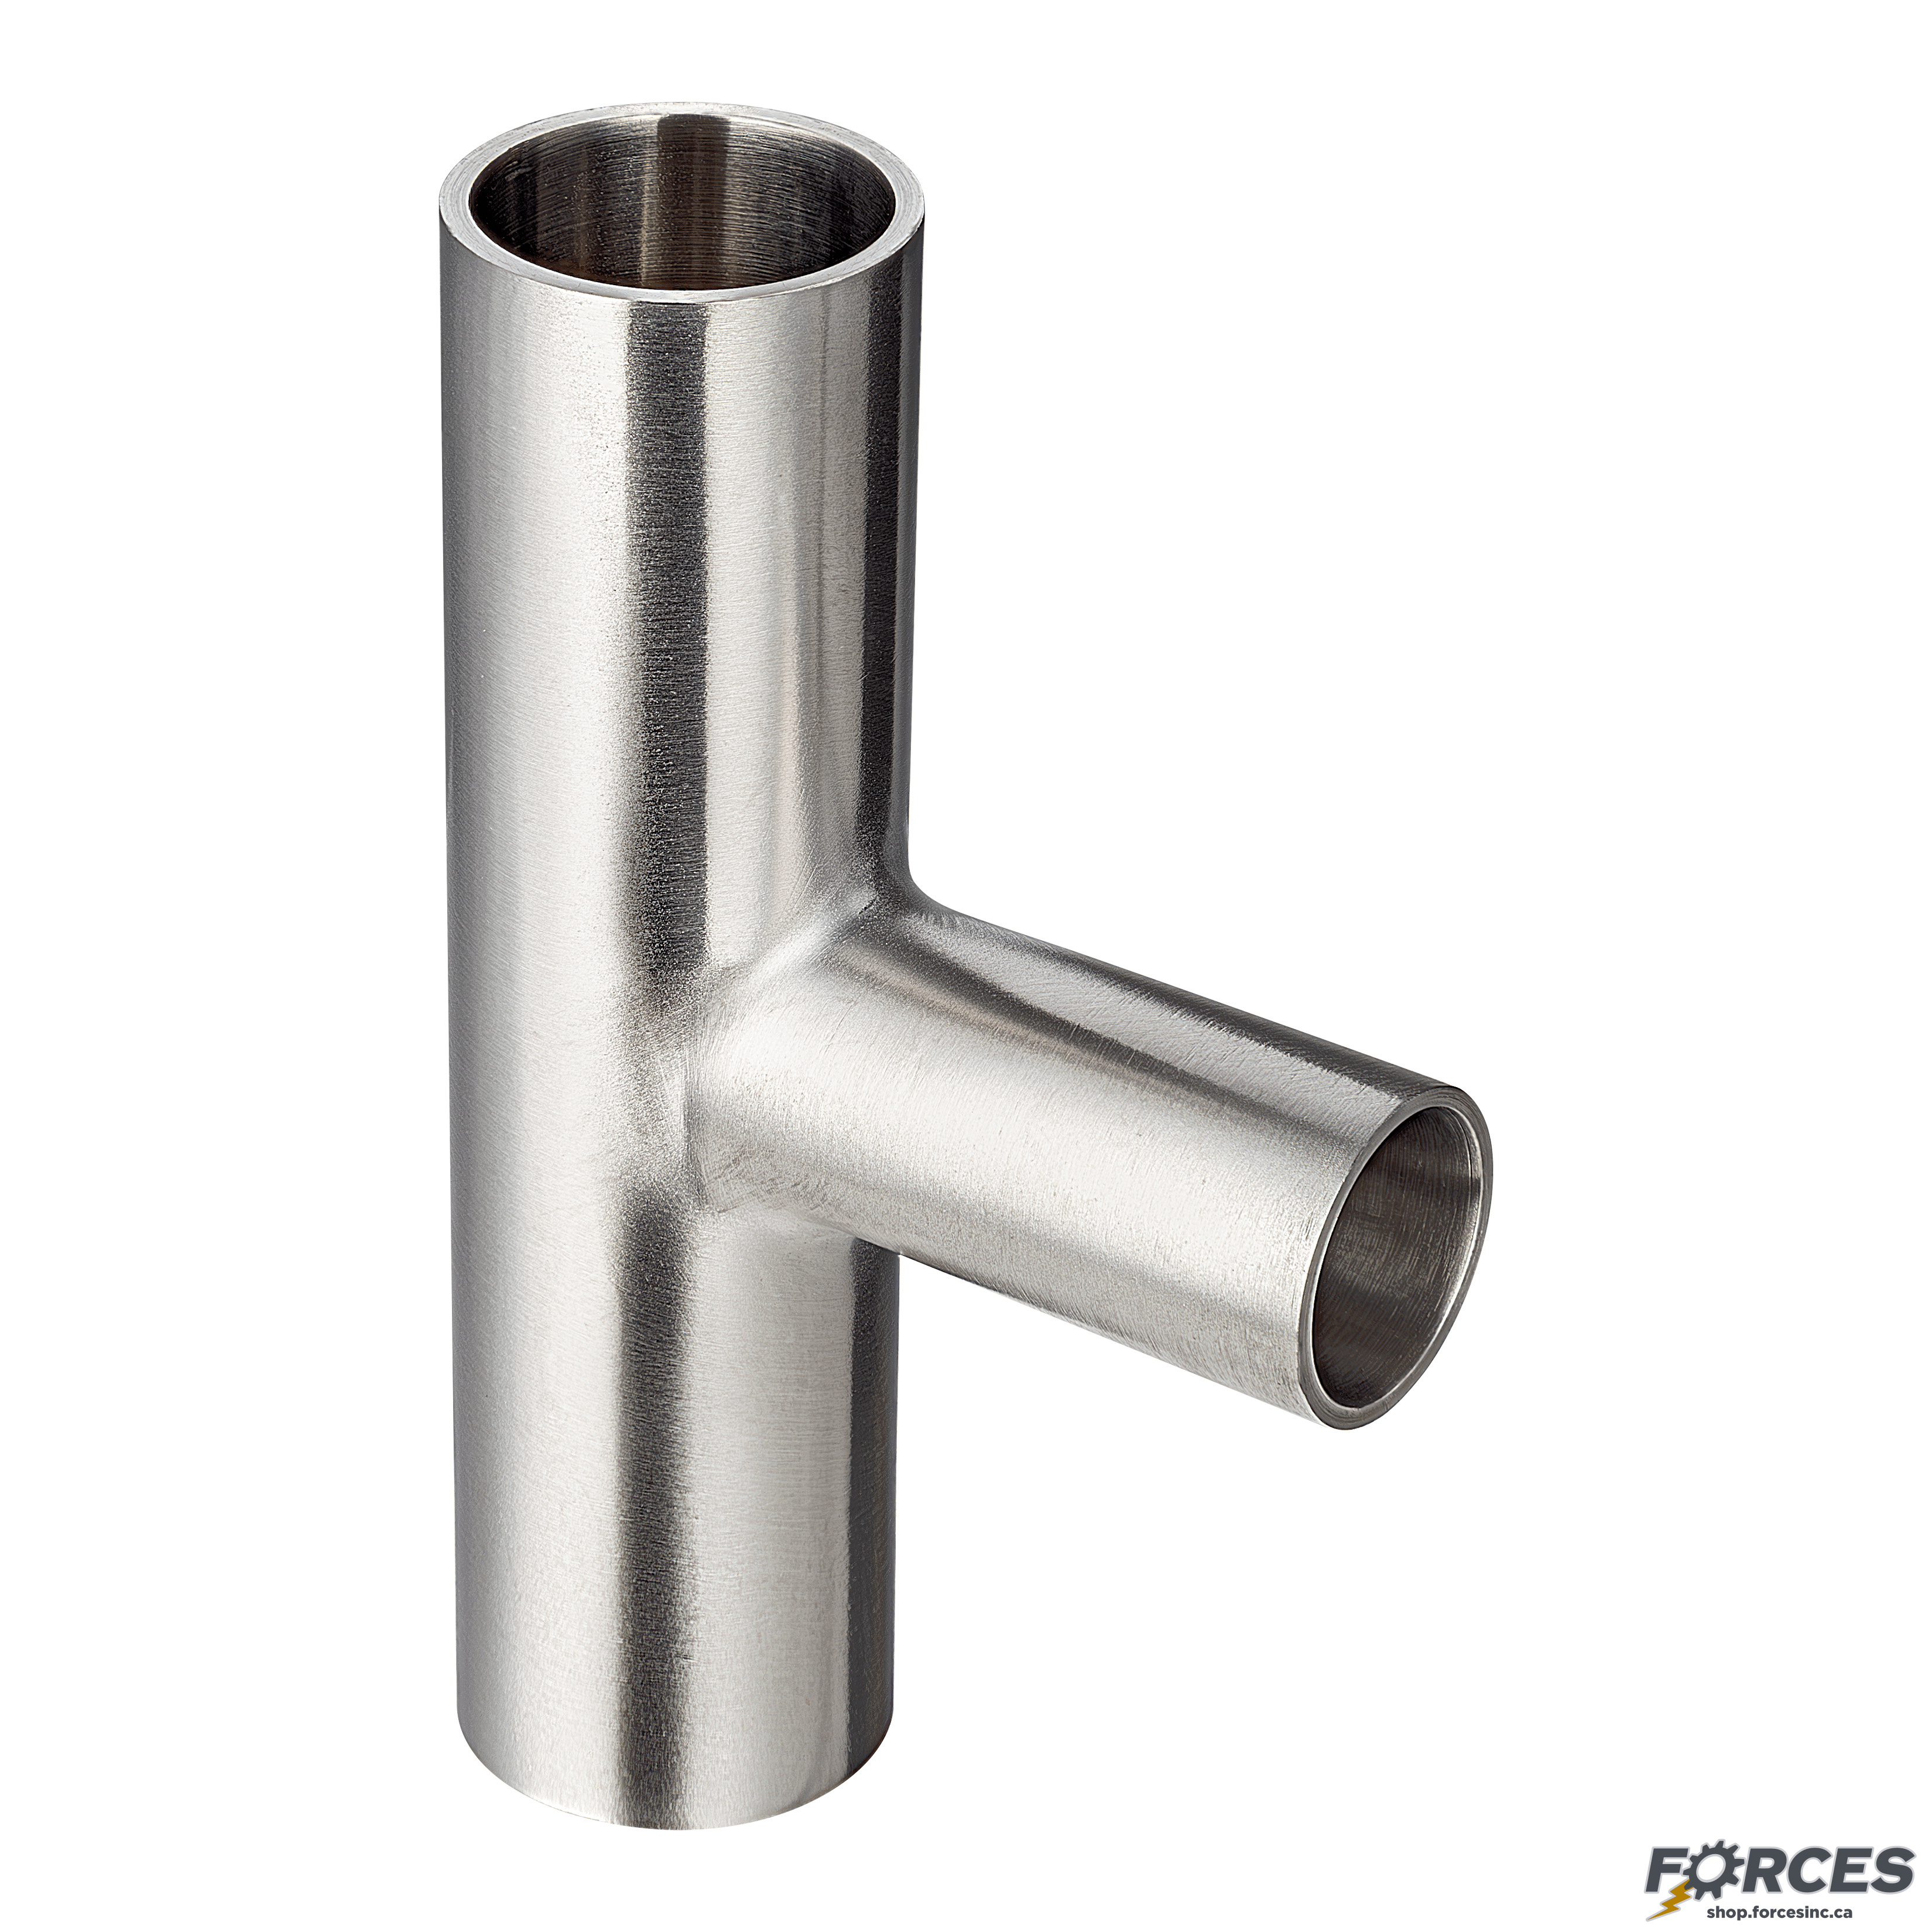 2" x 1" Butt Weld Tee Reducer - Stainless Steel 304 - Forces Inc